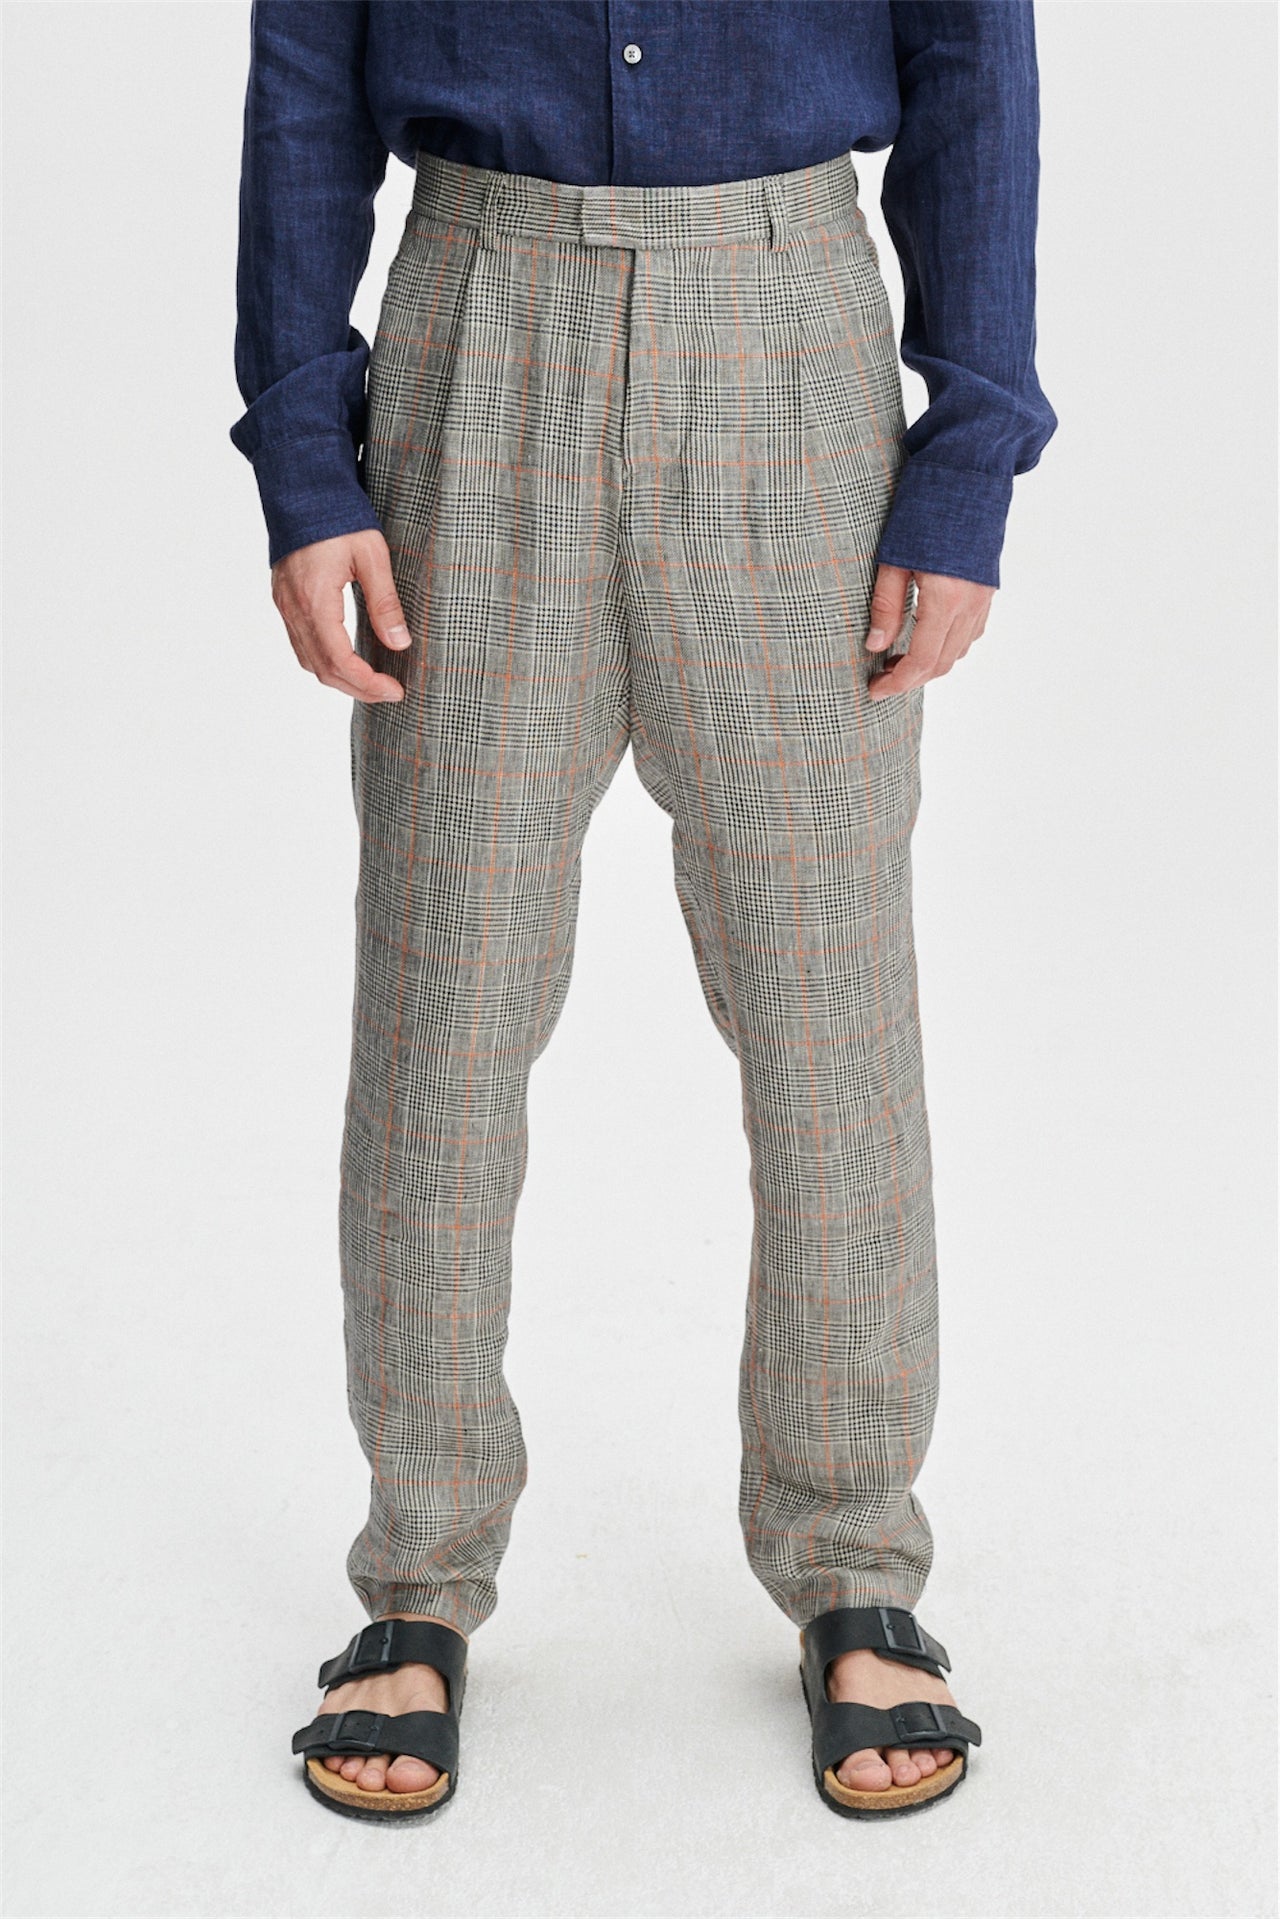 Trousers in a Grey and Vibrant Orange Prince of Wales Italian Linen by Albini